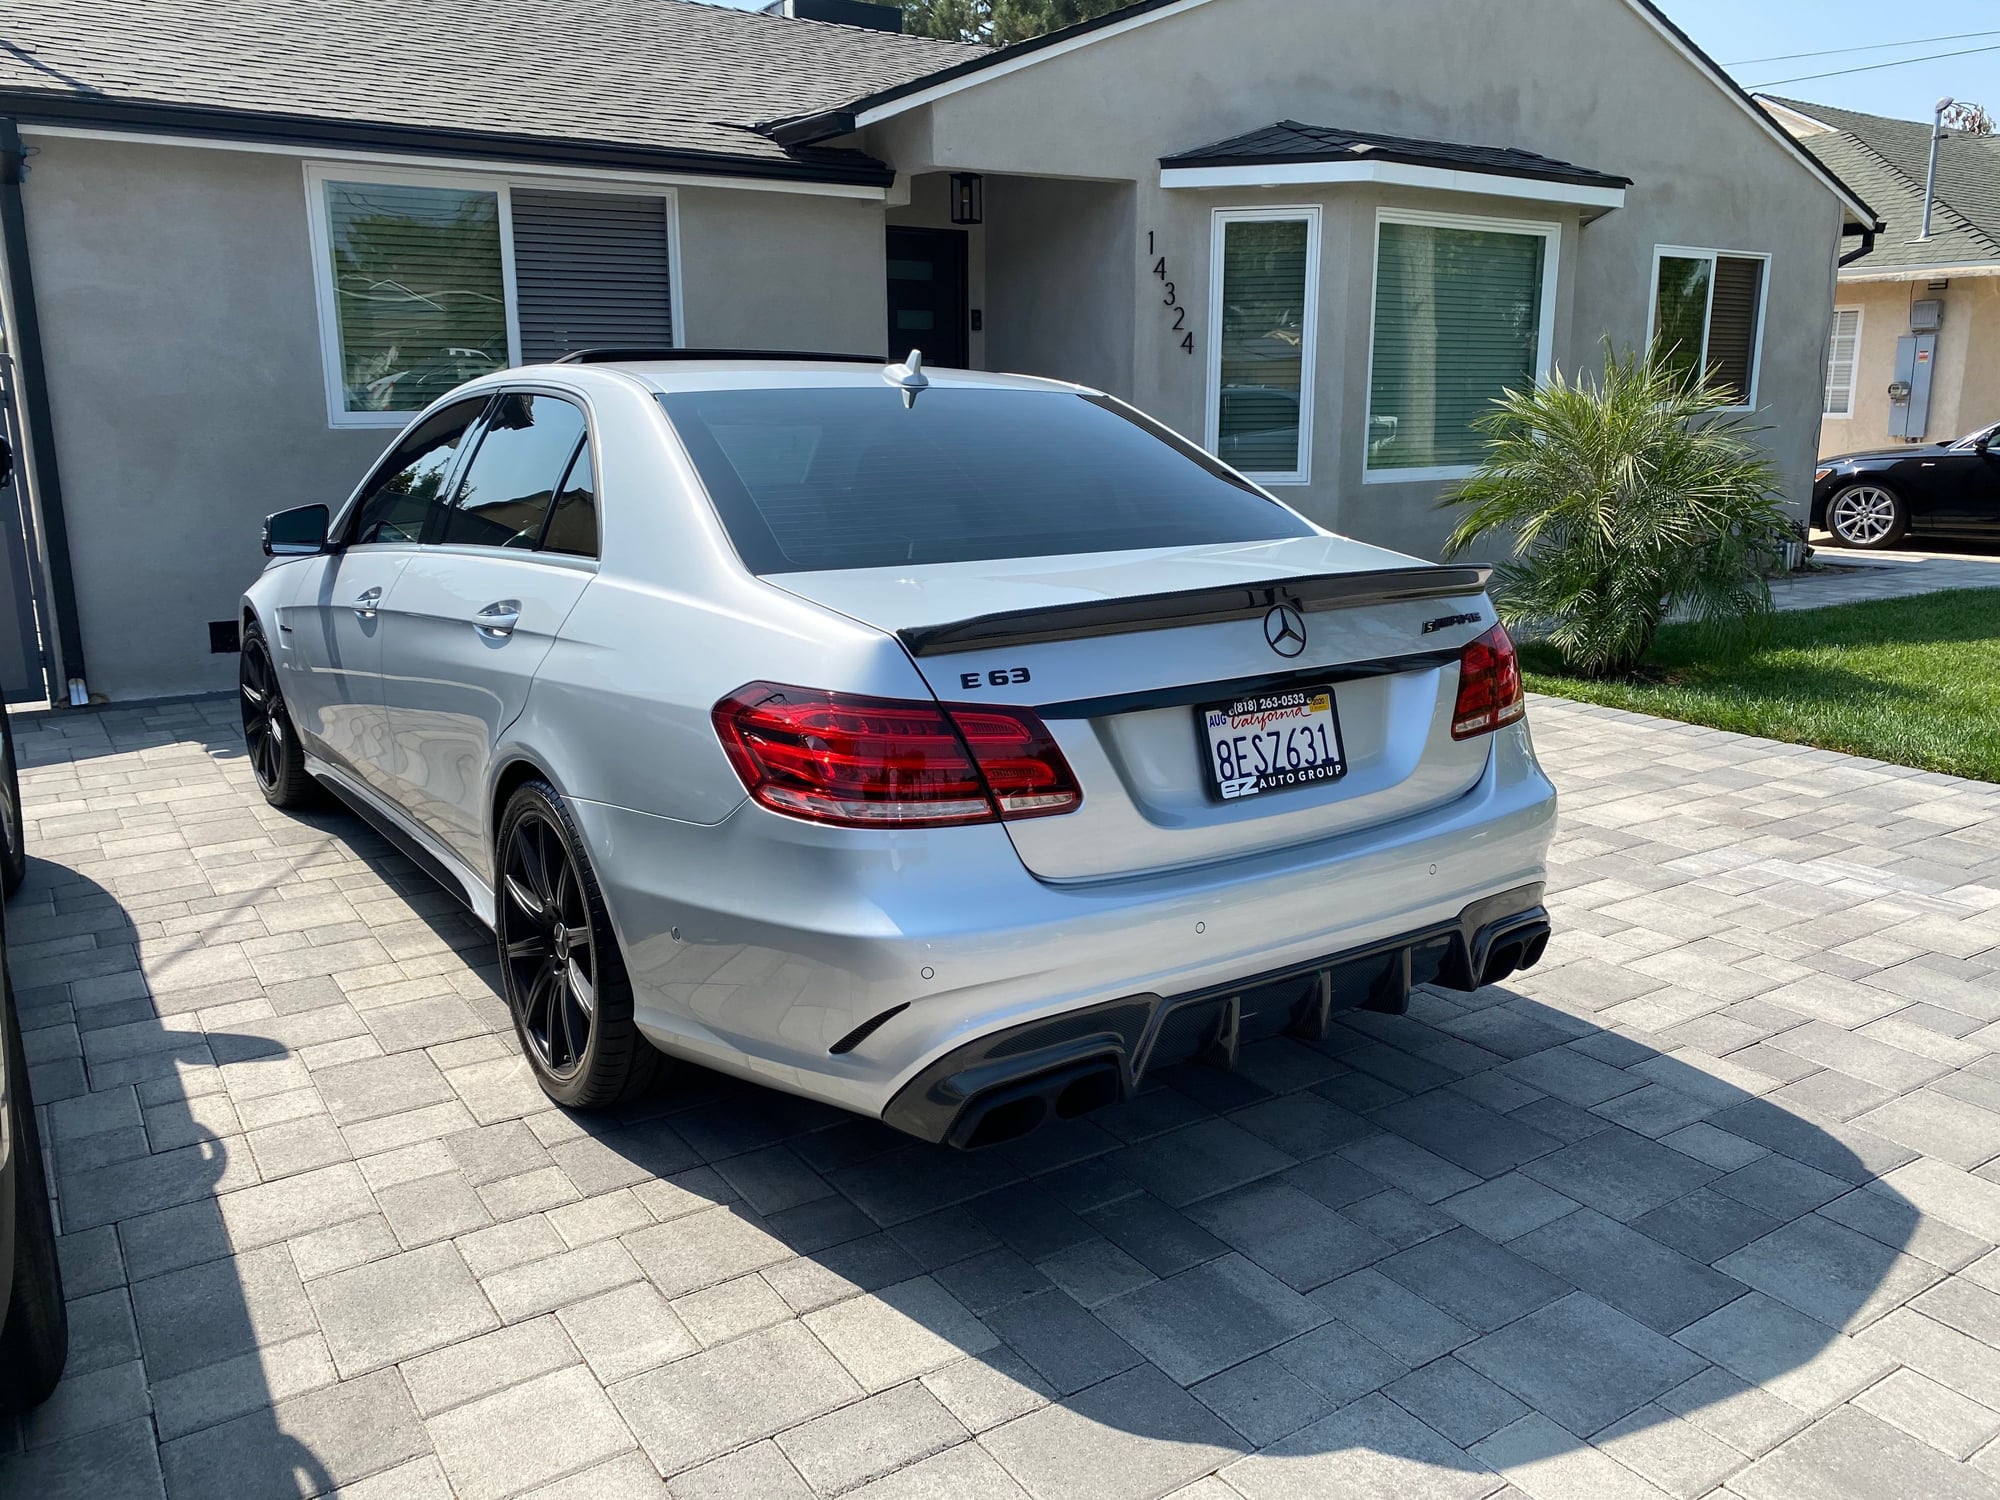 2014 Mercedes-Benz E63 AMG S - 2014 E63S Mint Condition 57k Miles! CPO Until July 2021 Transferable! - Used - Van Nuys, AR 91405, United States